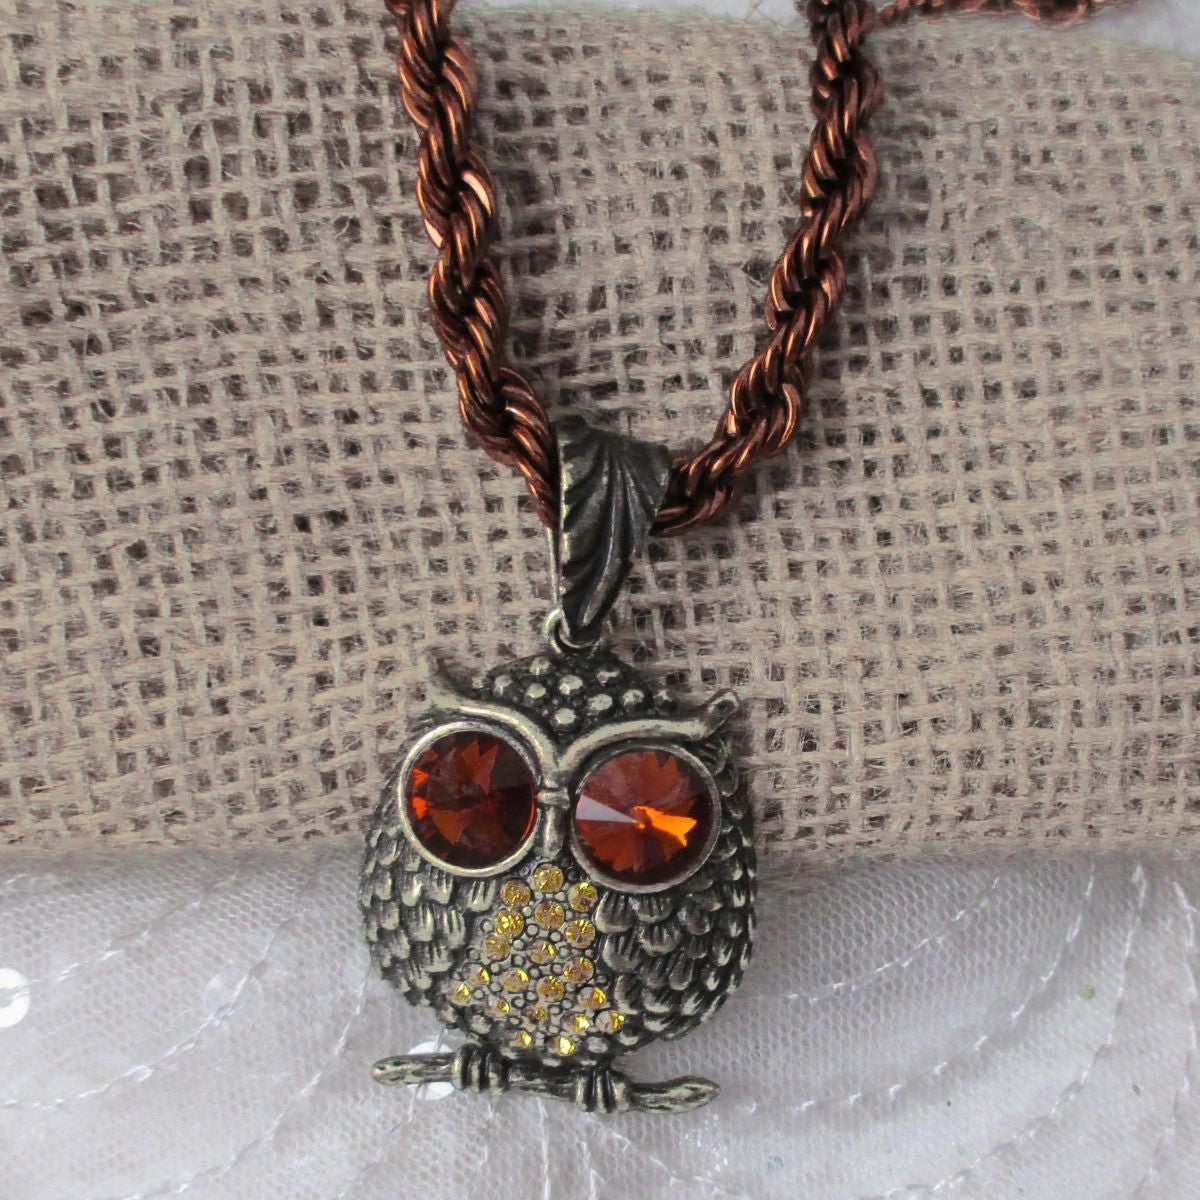 Antique Brass Owl Pendant on Copper Chain Necklace - VP's Jewelry